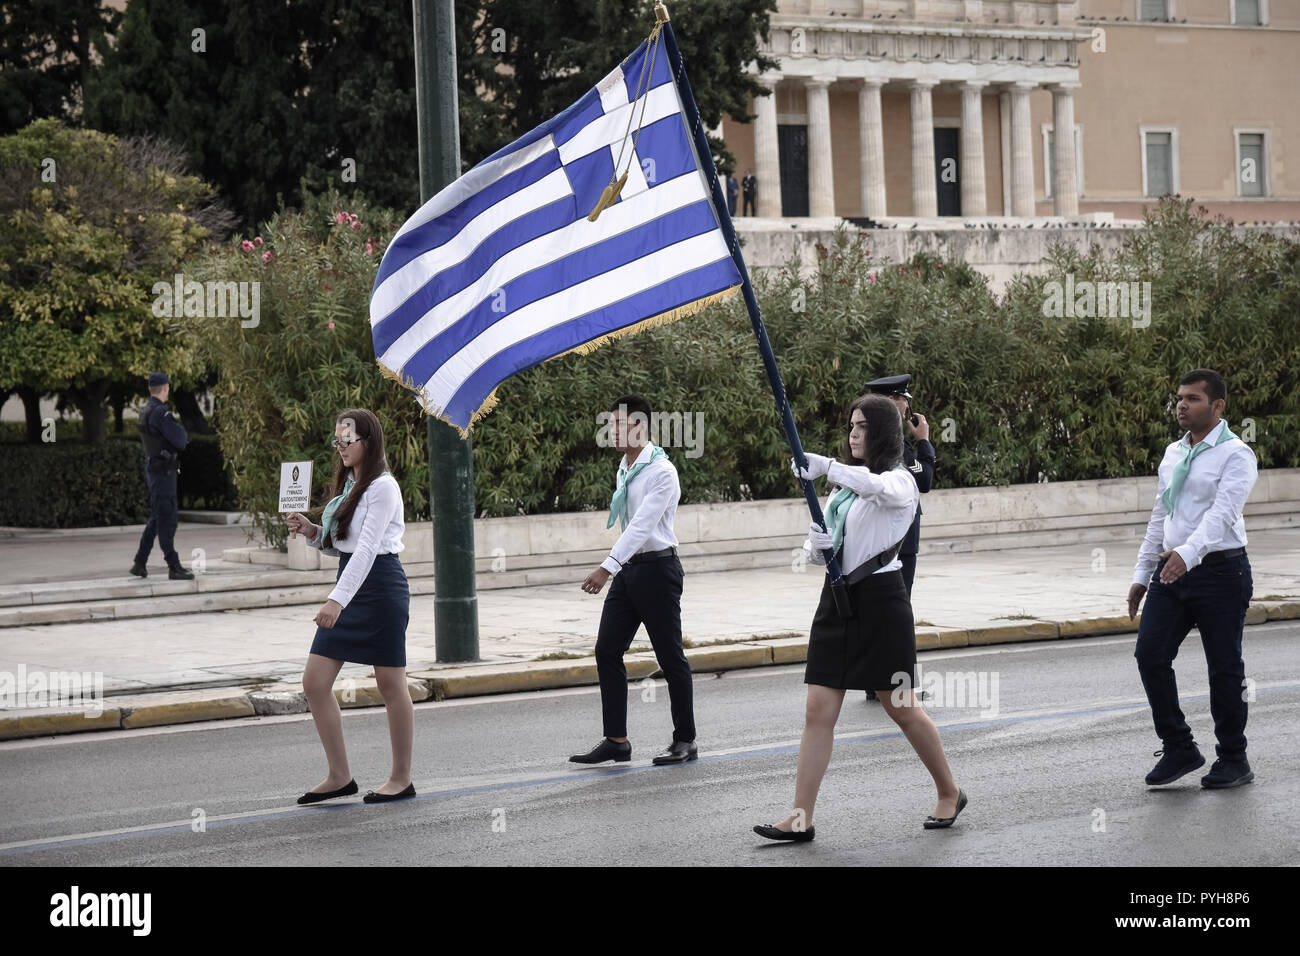 A student seen holding a flag as they take part during the celebrations. The national 'Oxi (No) Day' commemorates the rejection by Greek Prime Minister Ioannis Metaxas of the ultimatum made by the Italian dictator Benito Mussolini on 28 October 1940 during World War II.  It is celebrated yearly by Greek communities around the world, in Greece and Cyprus. After World War II it became a public holiday in Greece and Cyprus and the event is commemorated every year with military and student parades. On every anniversary, most public buildings and residences are decorated with Greek flags. Stock Photo